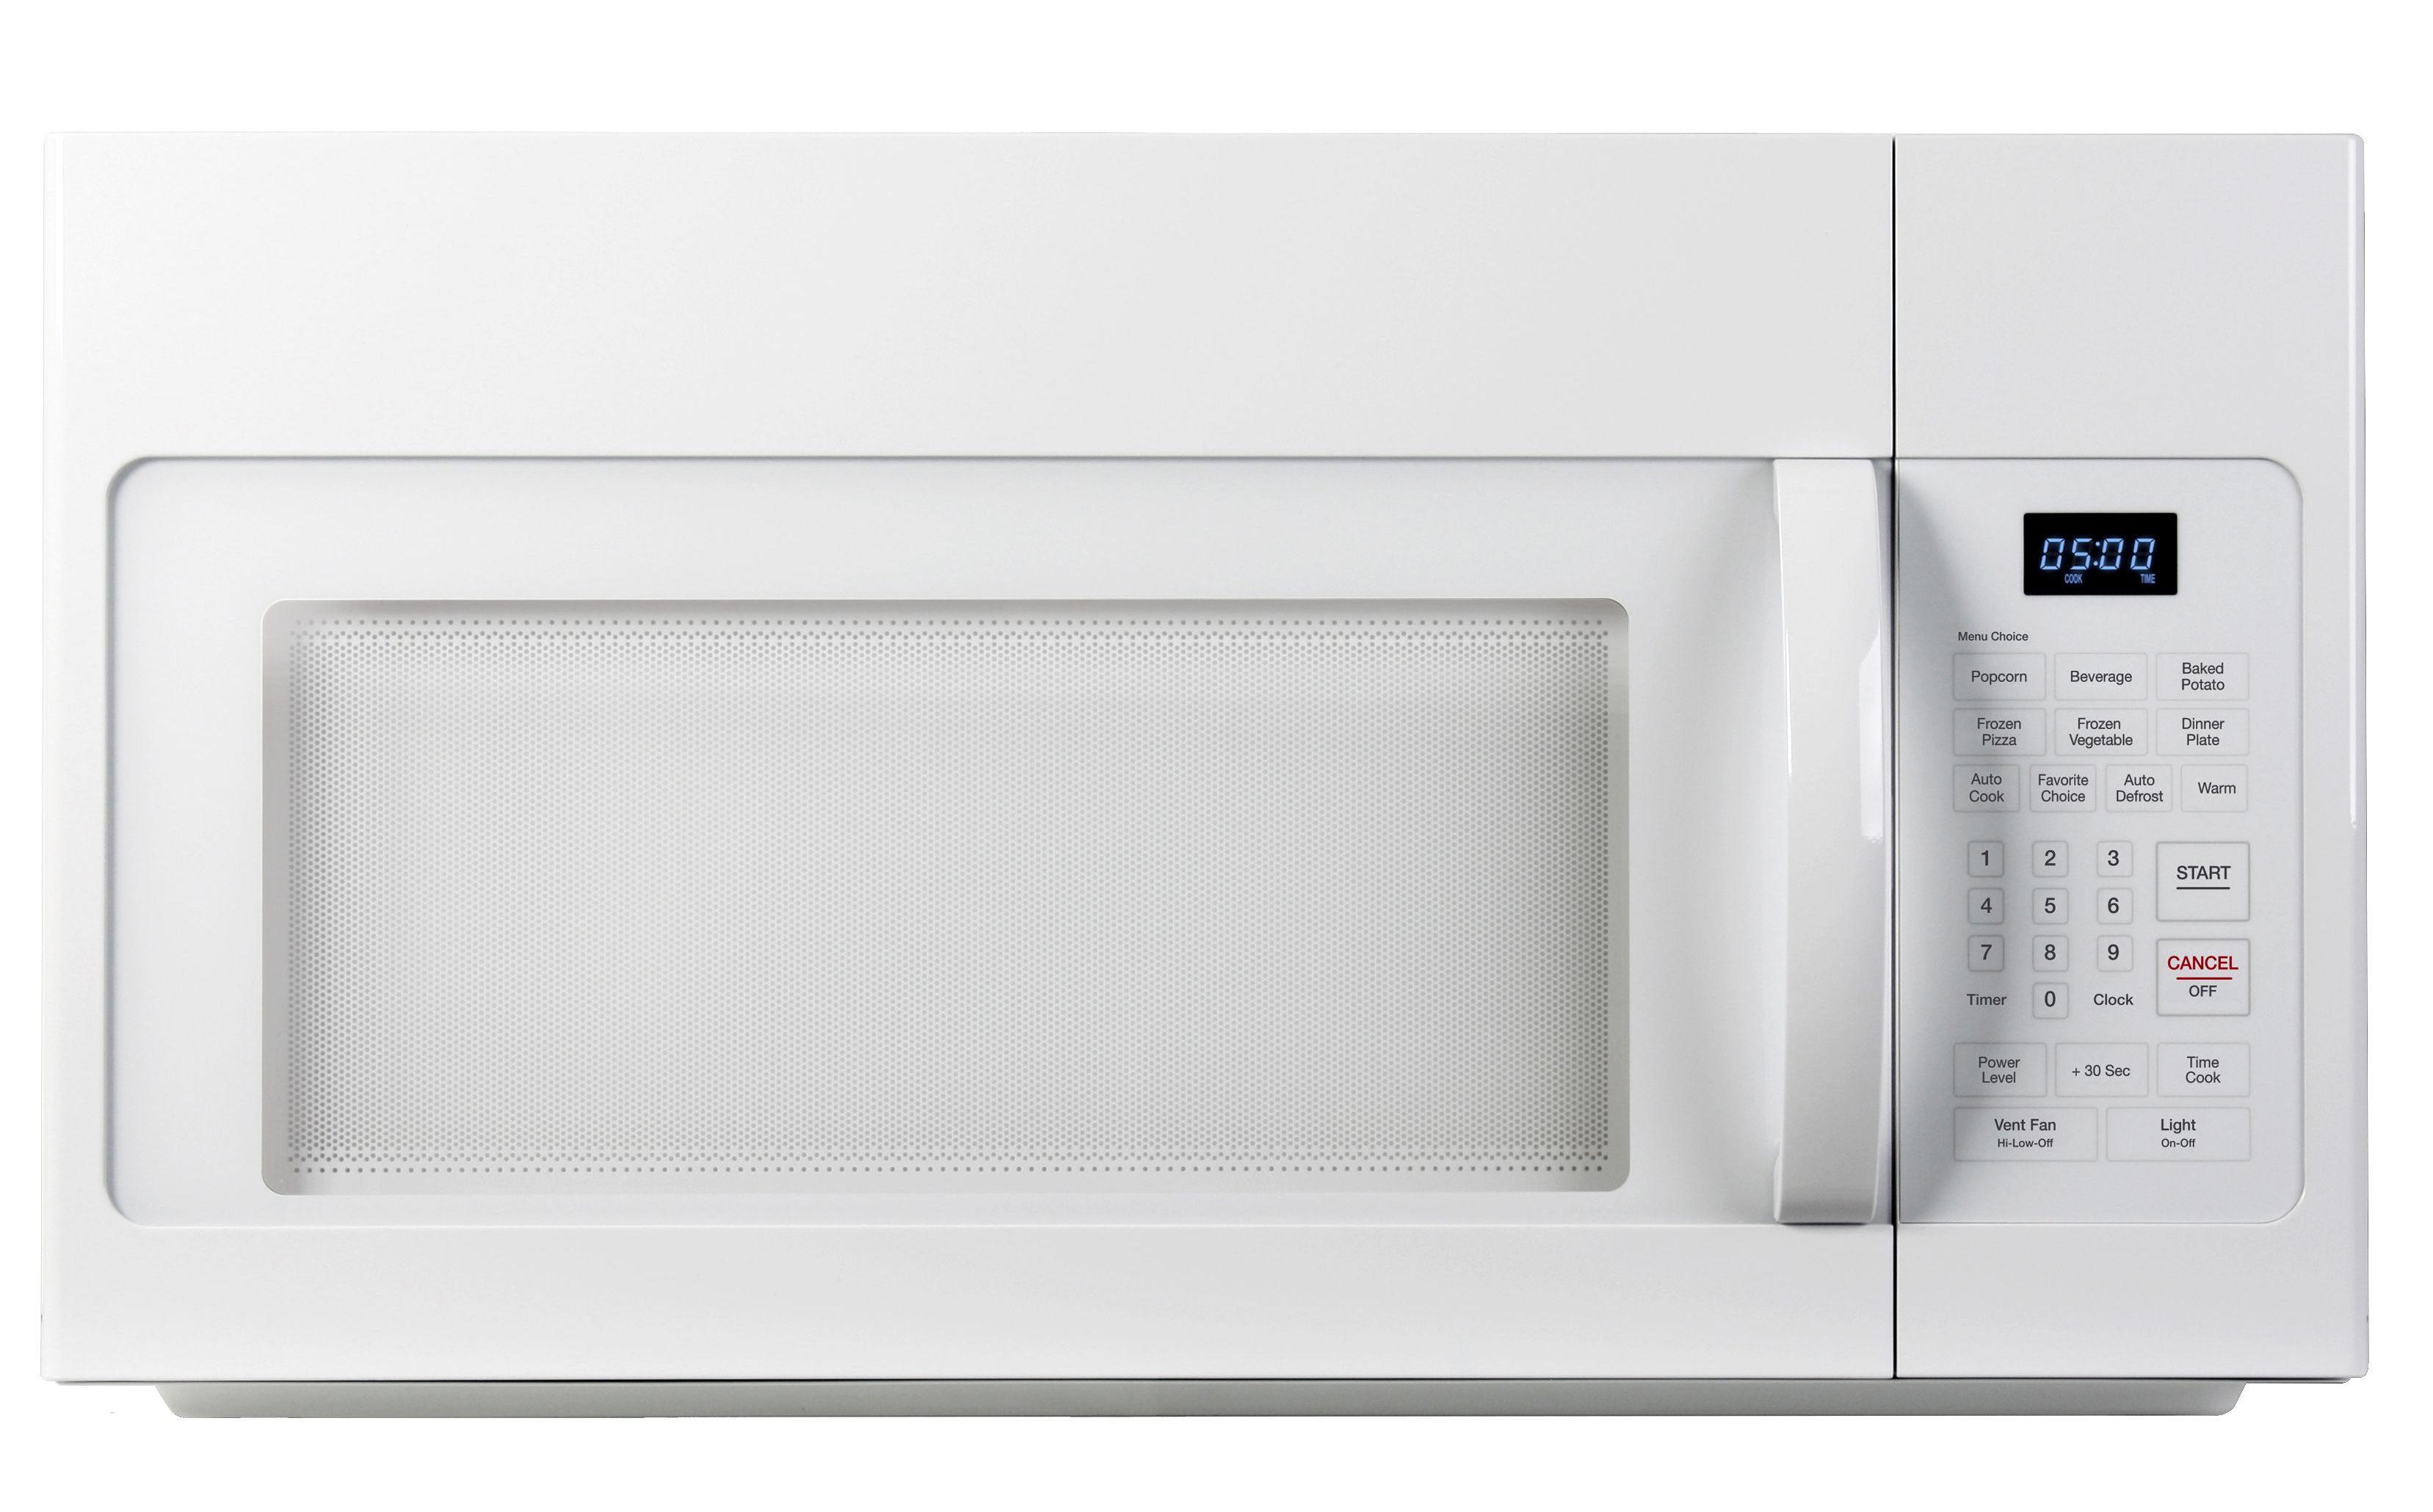 Sears 83502 1.6 cu. ft. Over-The-Range Microwave - White